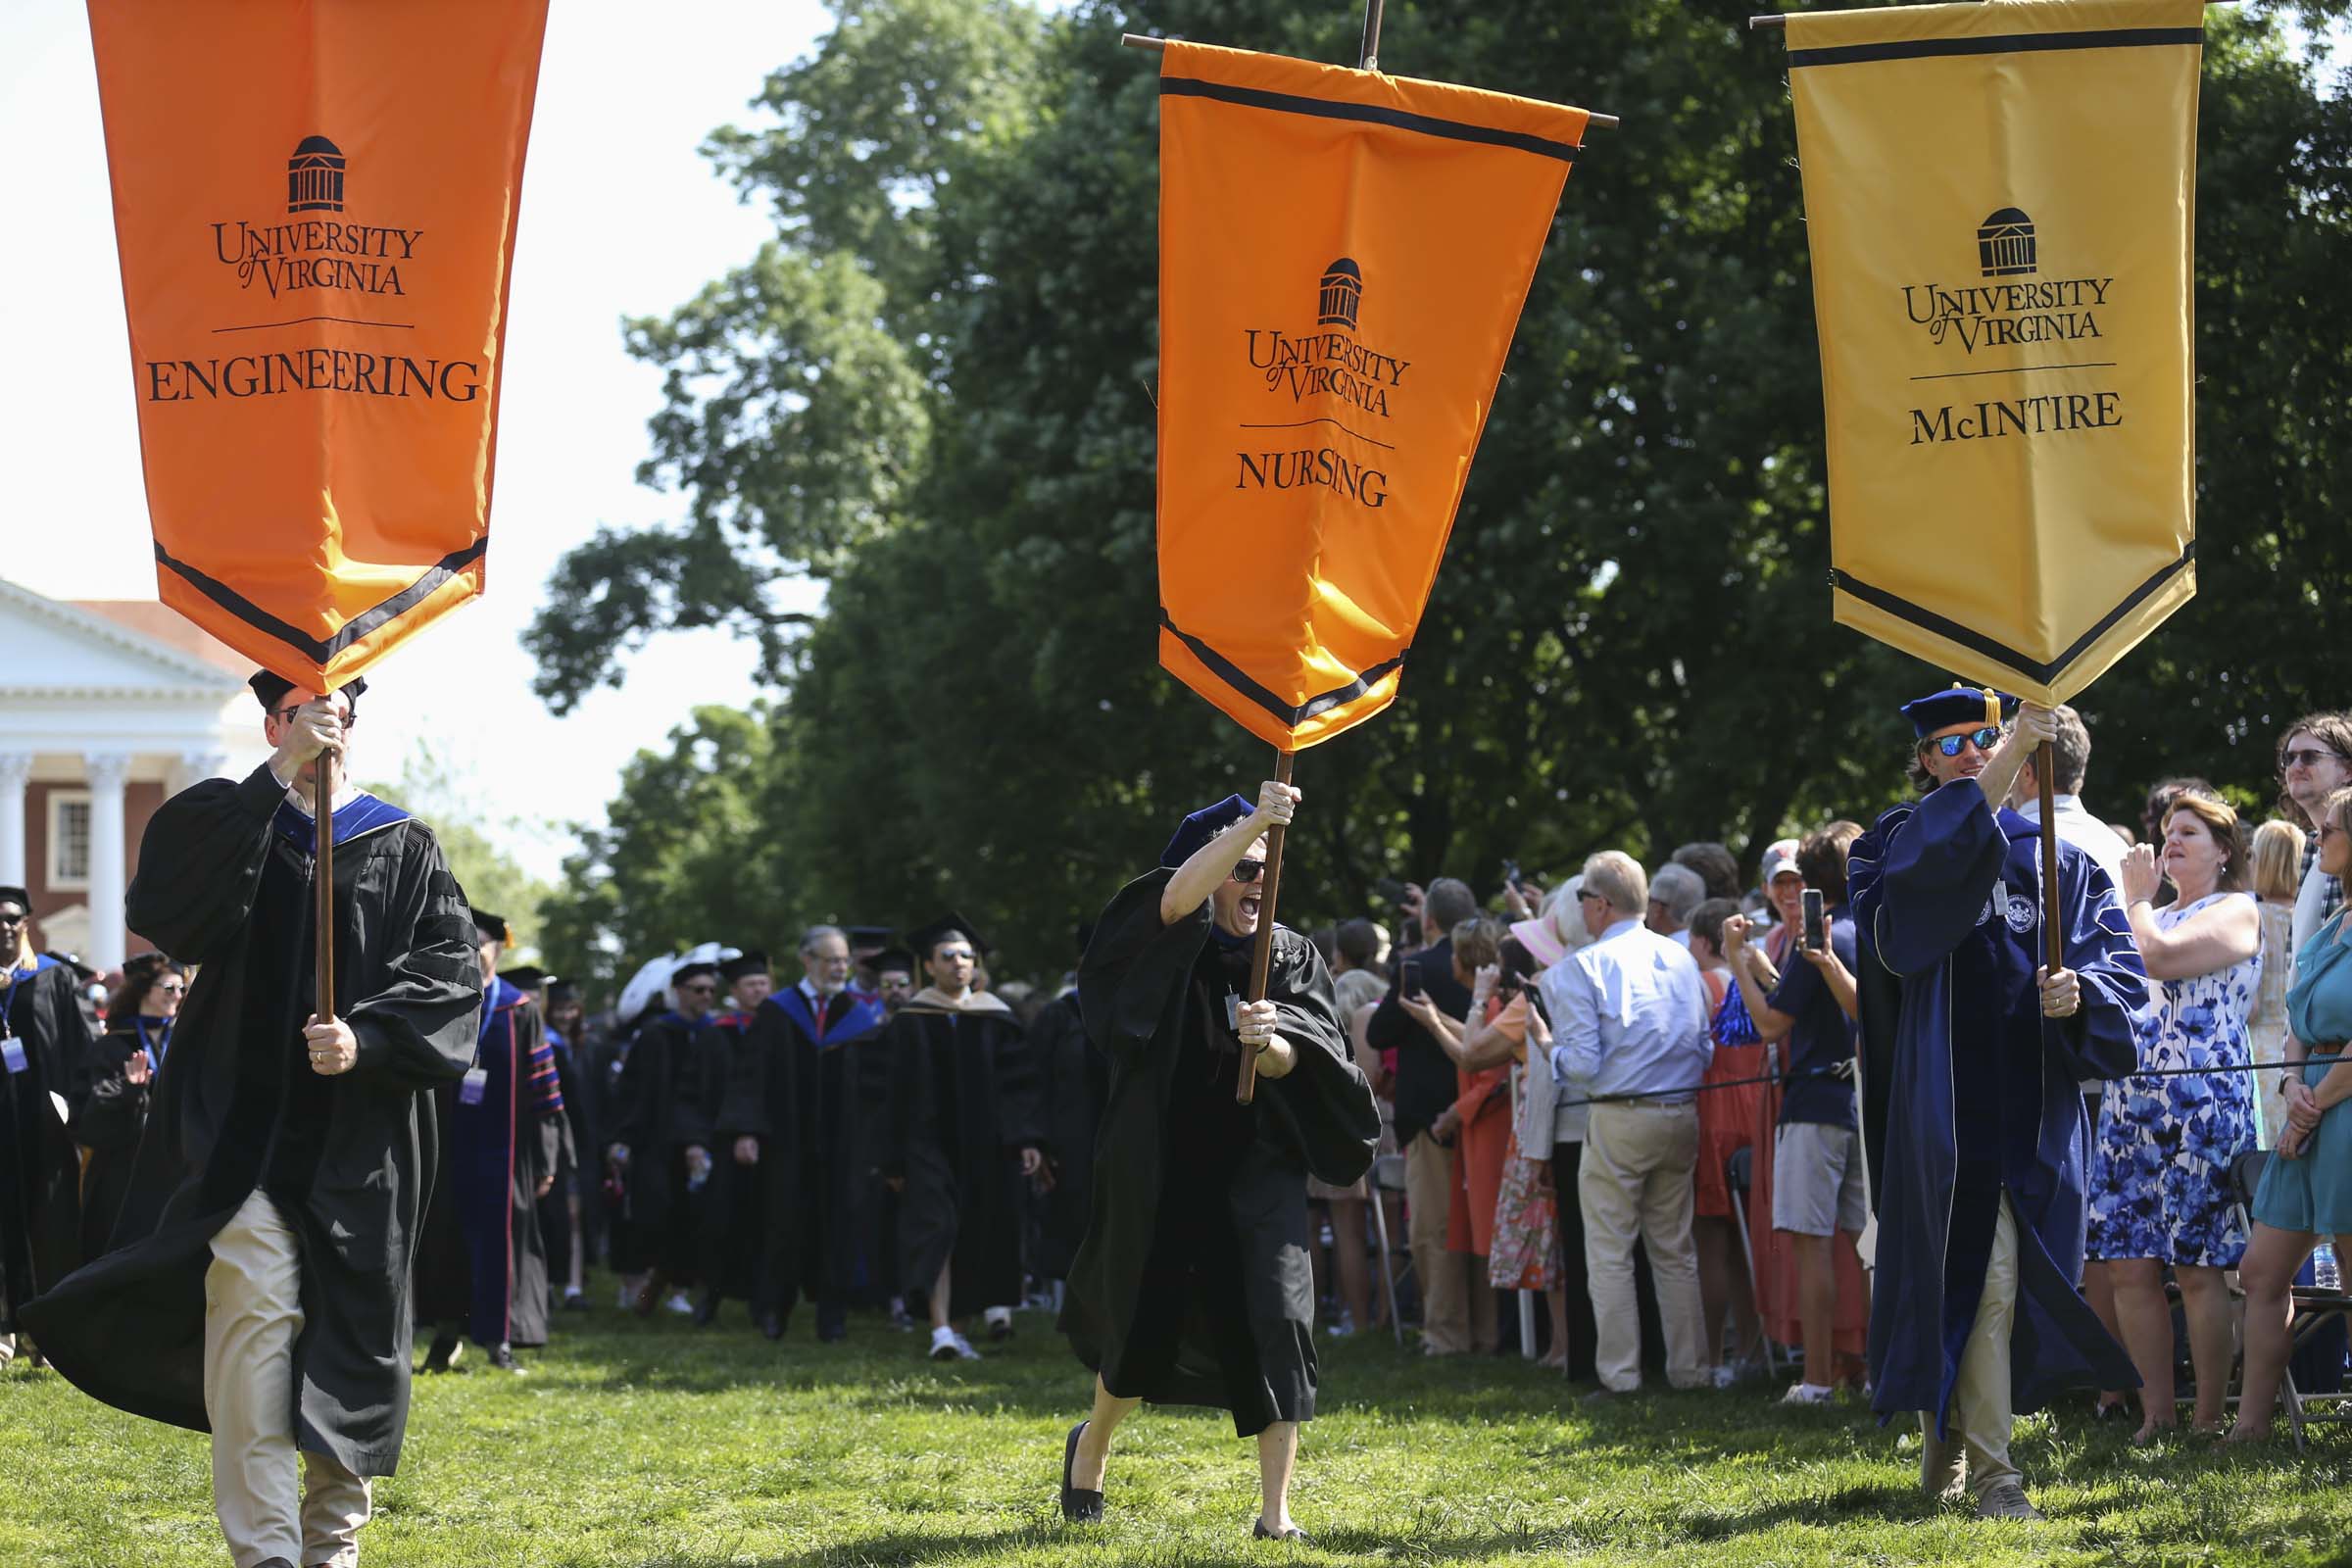 Standard-bearers hoisting banners for the schools of Engineering and Nursing, and the McIntire School, lead lines of their graduates across the Lawn.